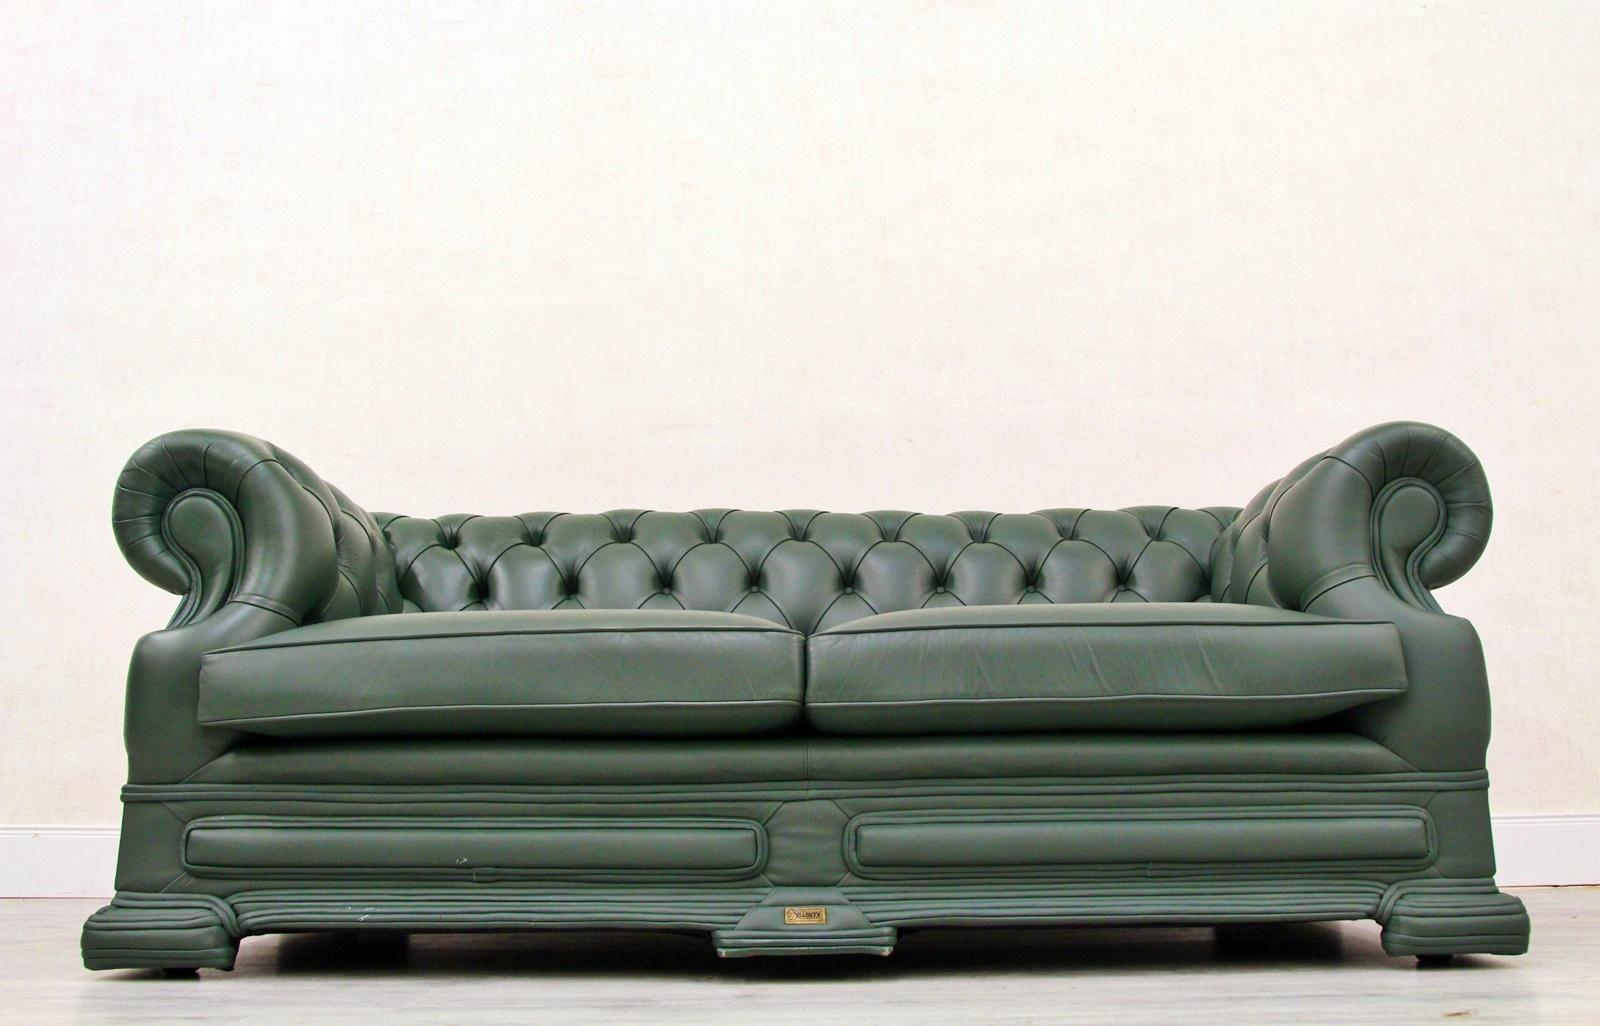 Chesterfield real leather threesome sofa
in original design.

Condition: The sofa is in a very good condition (Mint condition)
sofa
Measures: Height x 75cm, length x 190 cm, depth x 90 cm.
Upholstery is in a very good condition with patina